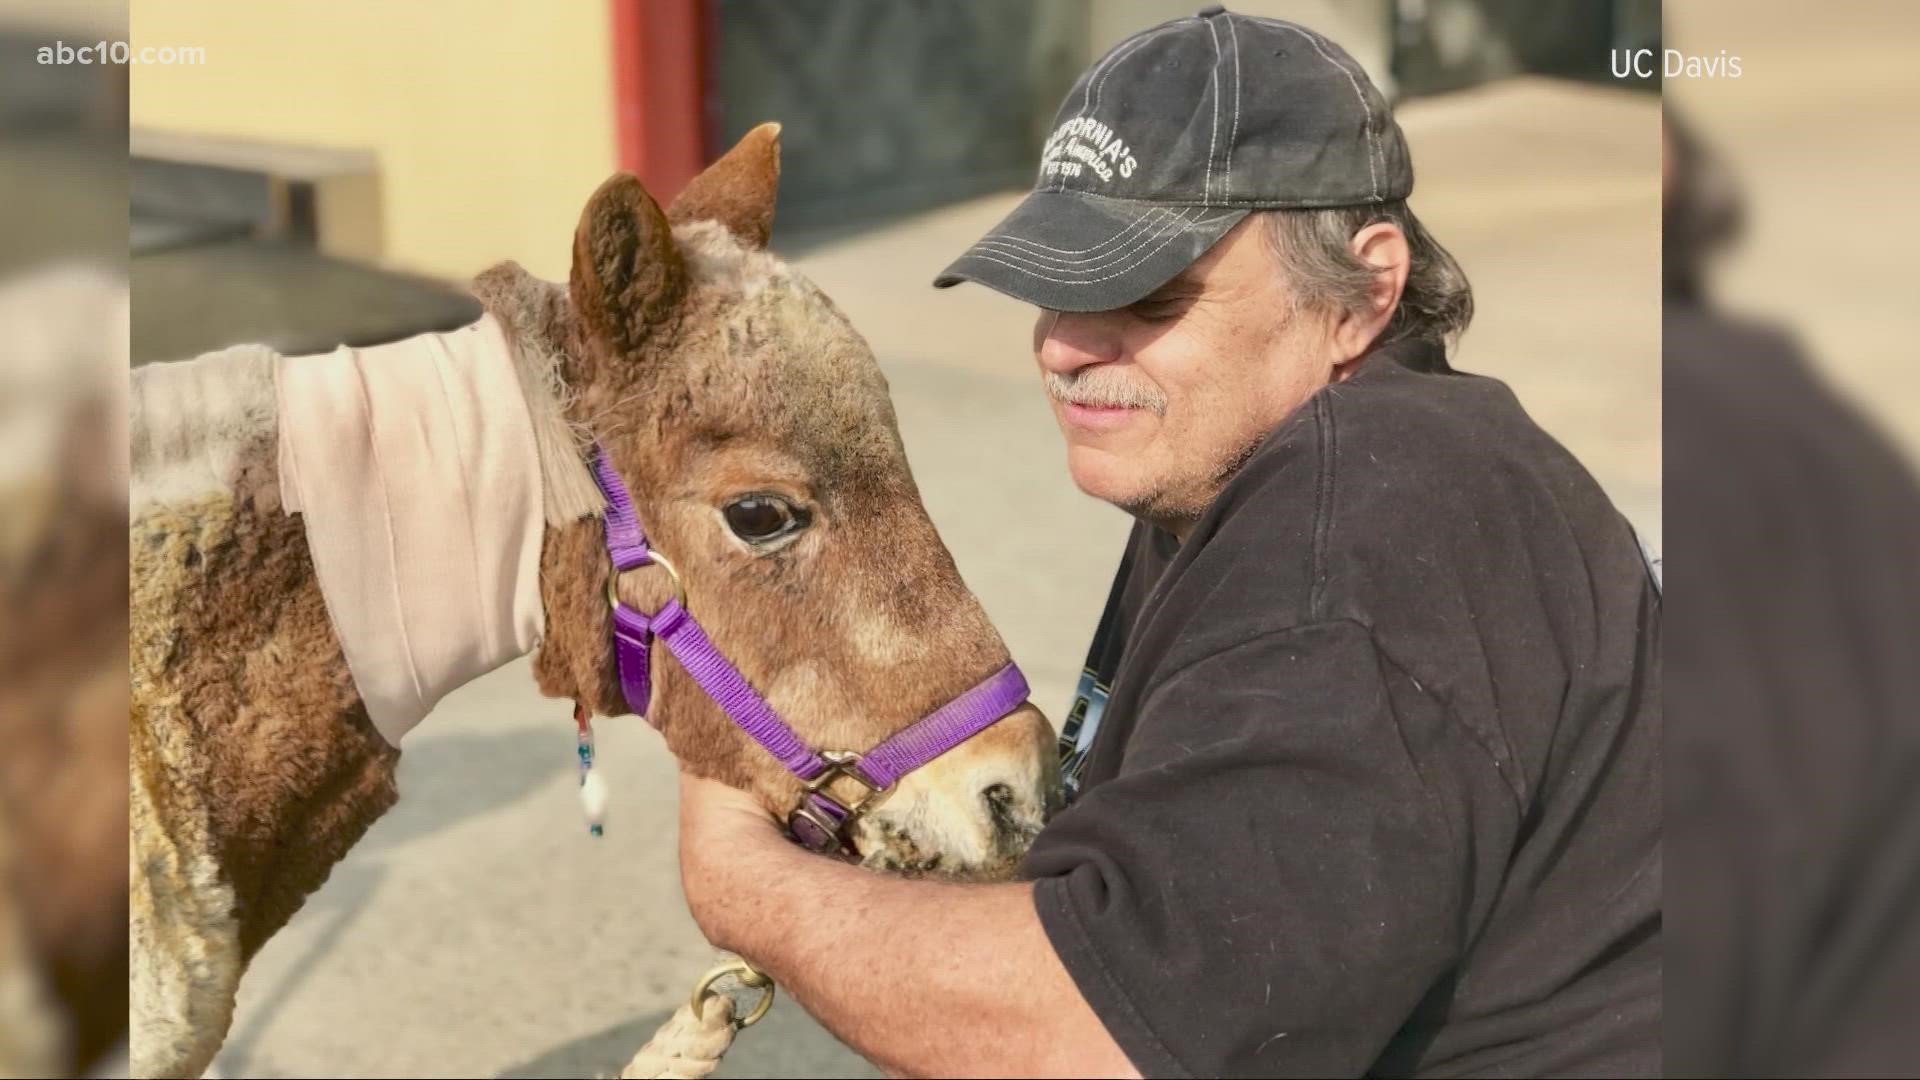 California Veterinary Emergency Team rescues animals and livestock during emergencies like wildfires.